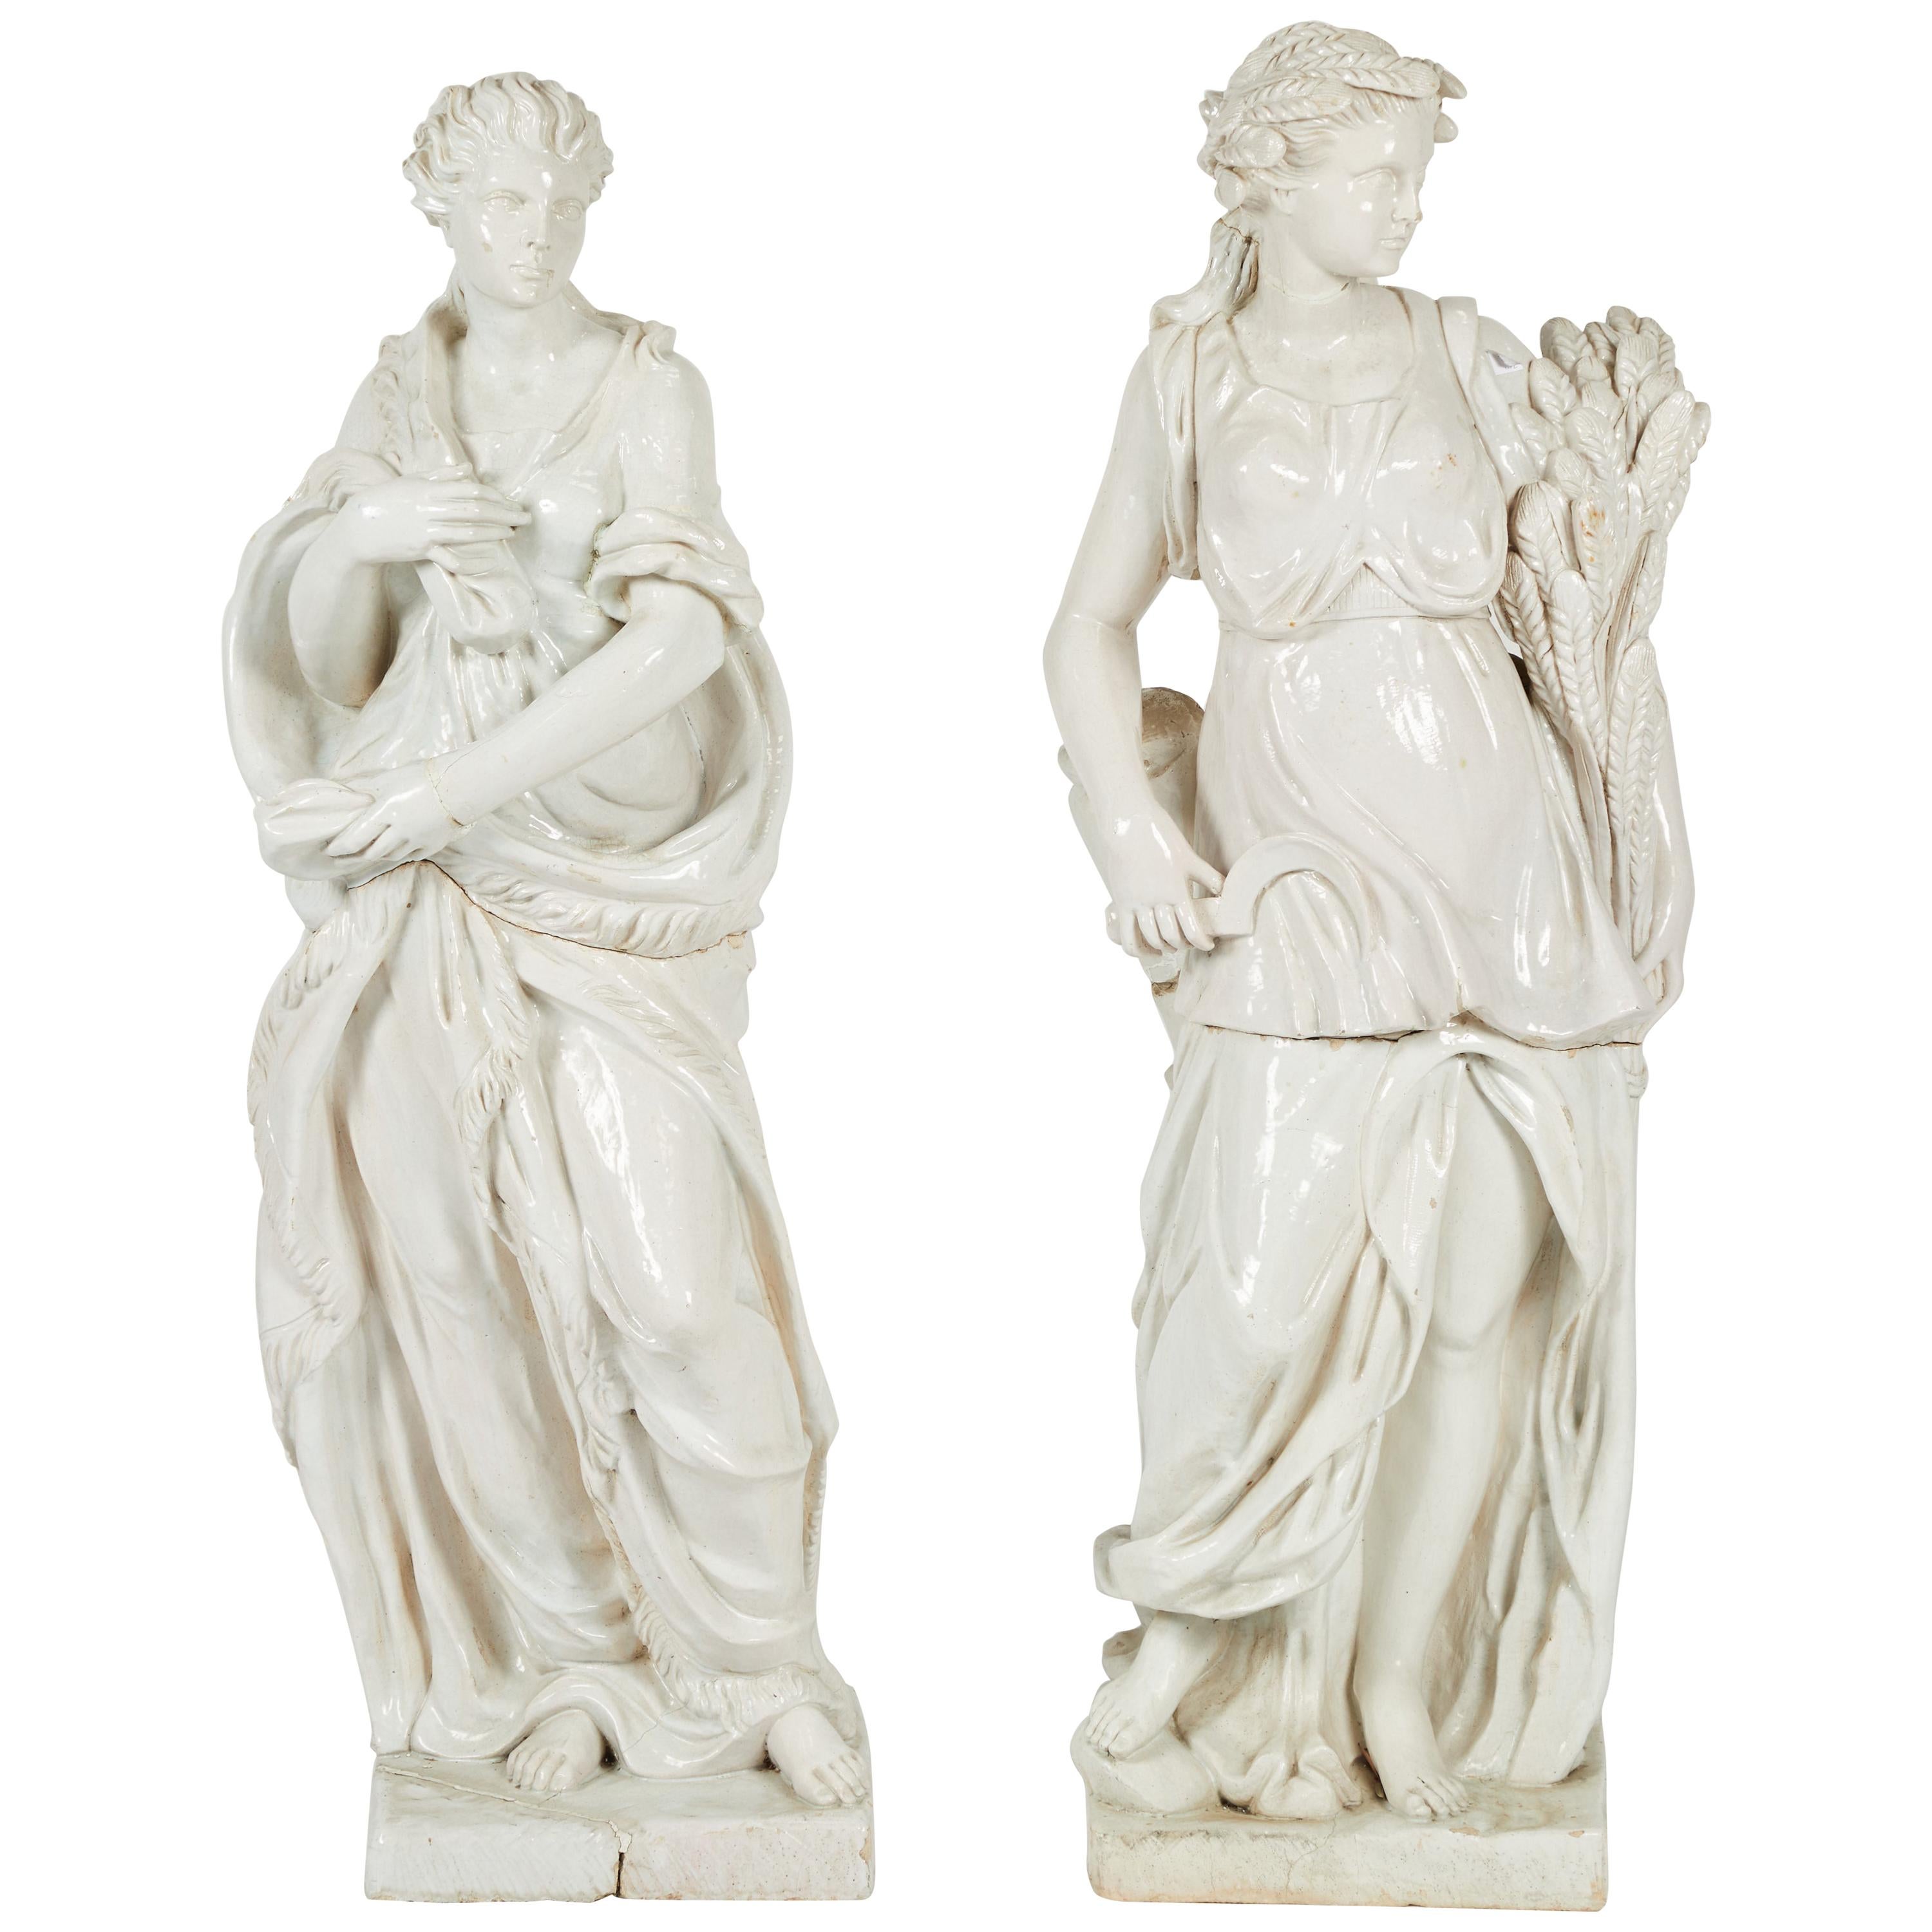 Pair of Near Life-Sized Continental Glazed Earthenware Statues